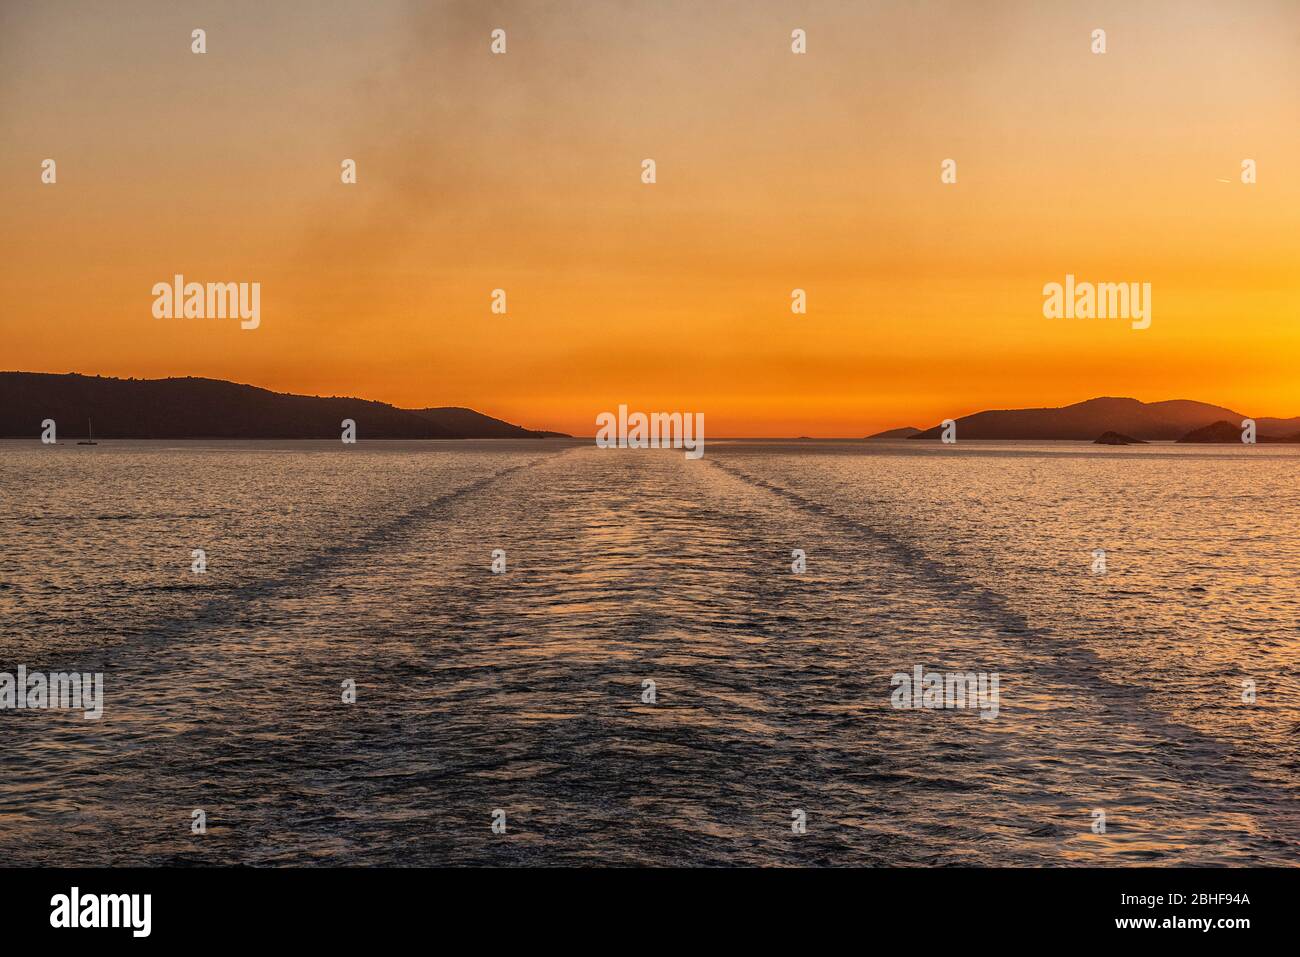 Adriatic Sea, Sea Croatia. The quiet of the sunset seen from the ship. The sun sets between the Croatian islands in the wake of the ship Stock Photo